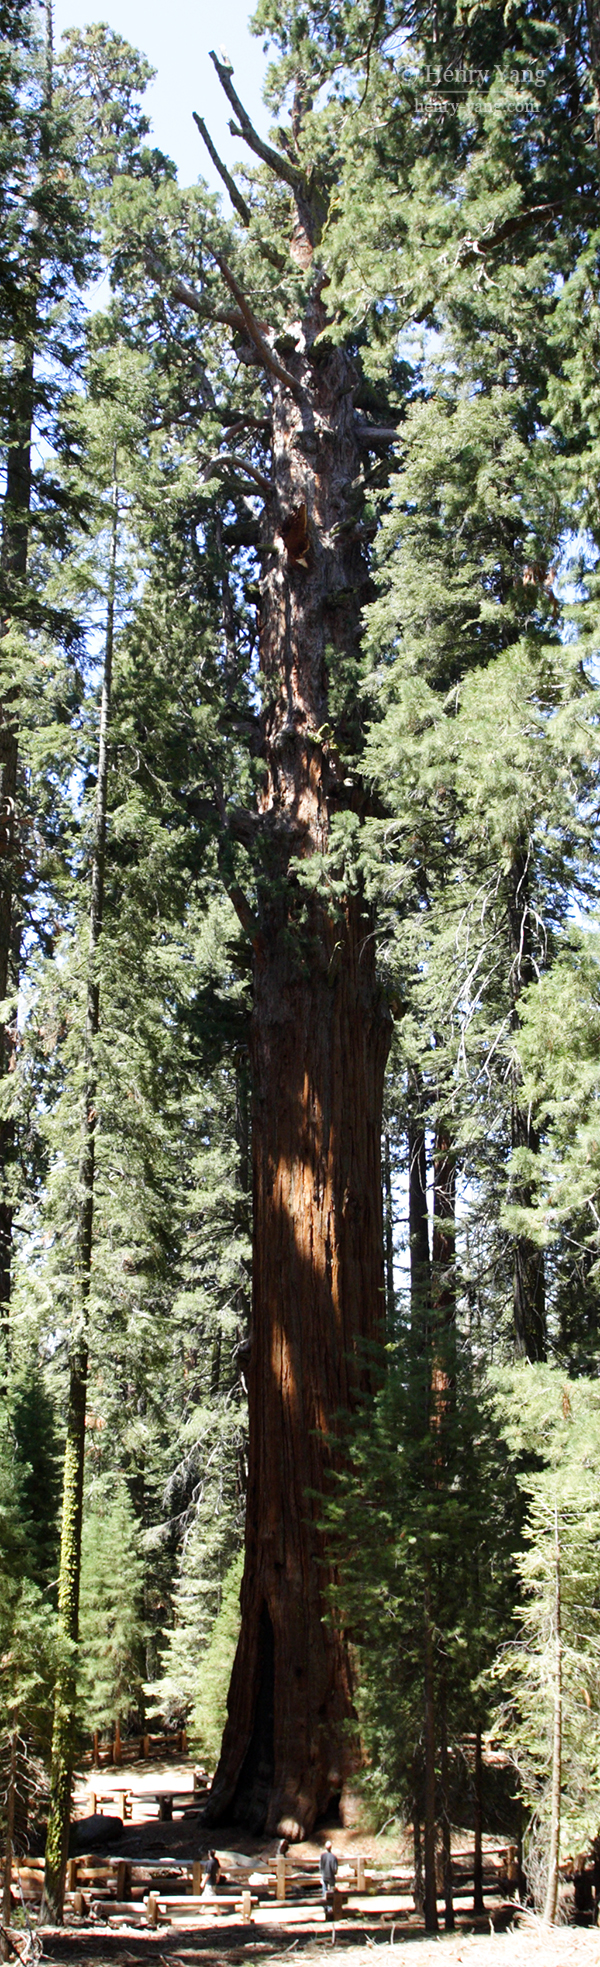 General Sherman Tree - Largest Living Thing on the Planet, Sequoia National Park, California, 5/2007